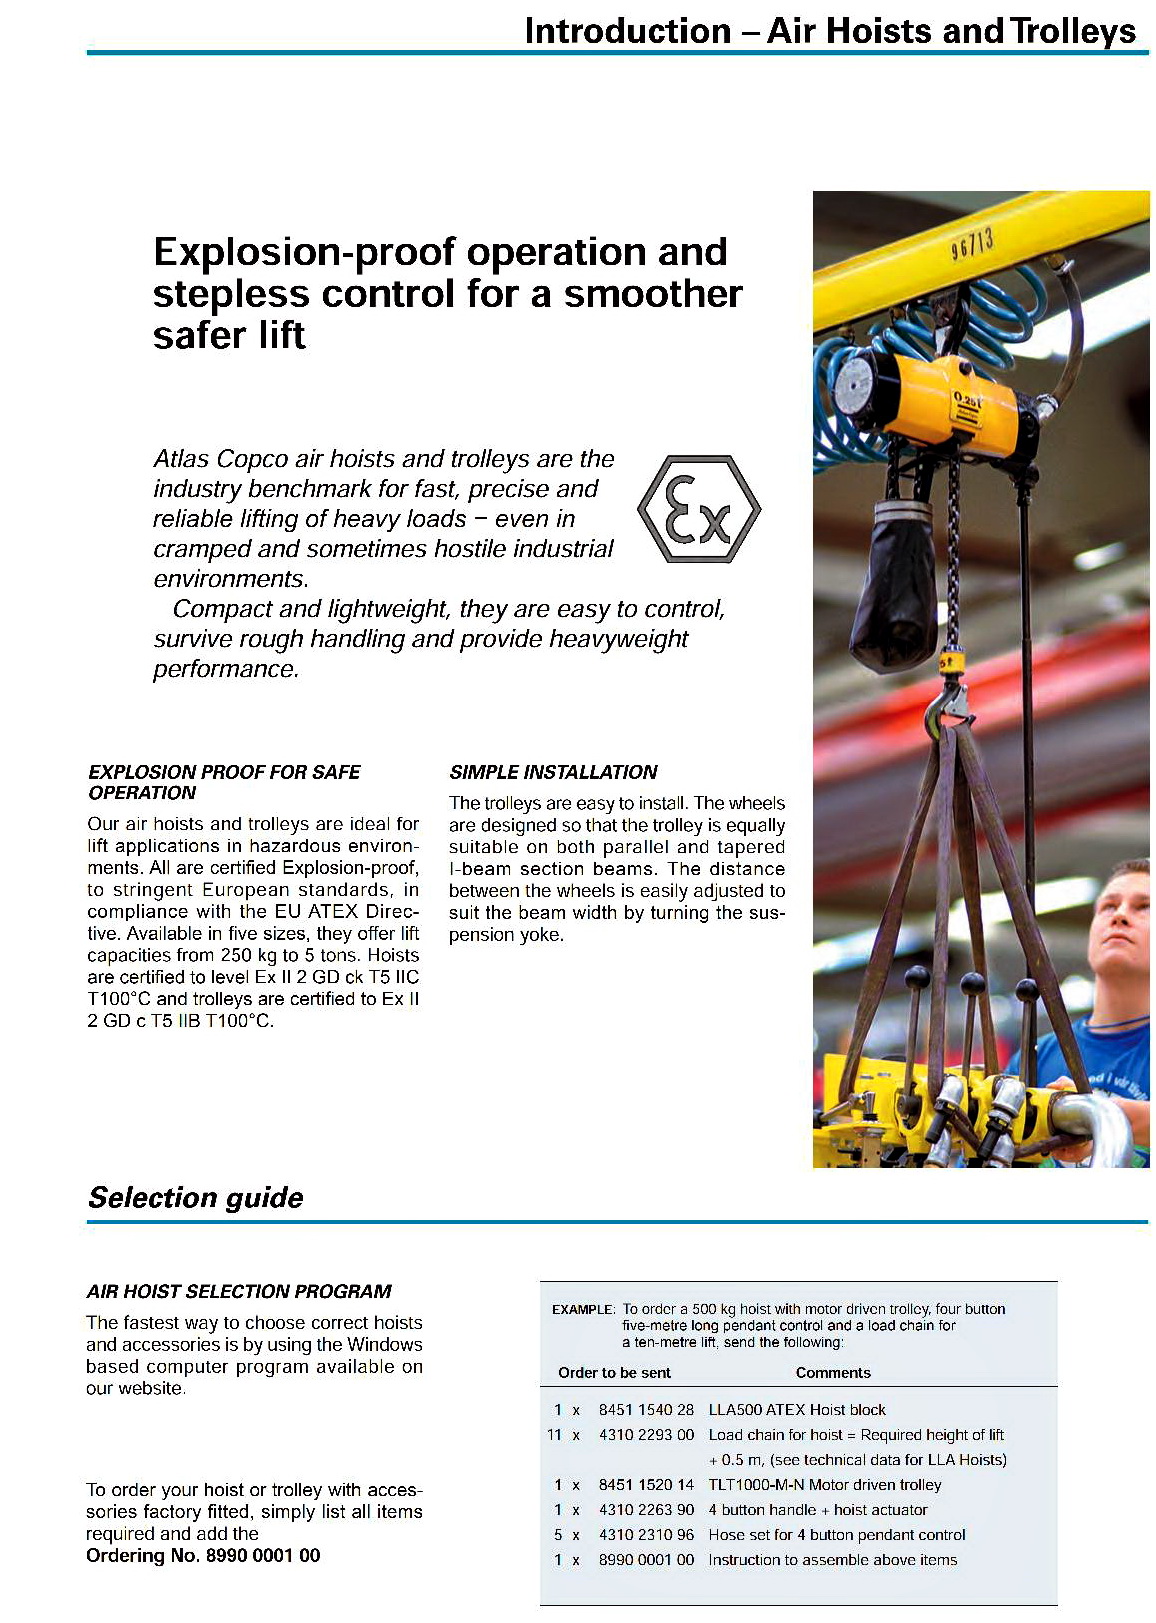 Atlas Copco Air Hoist with Explosion Proof Certified